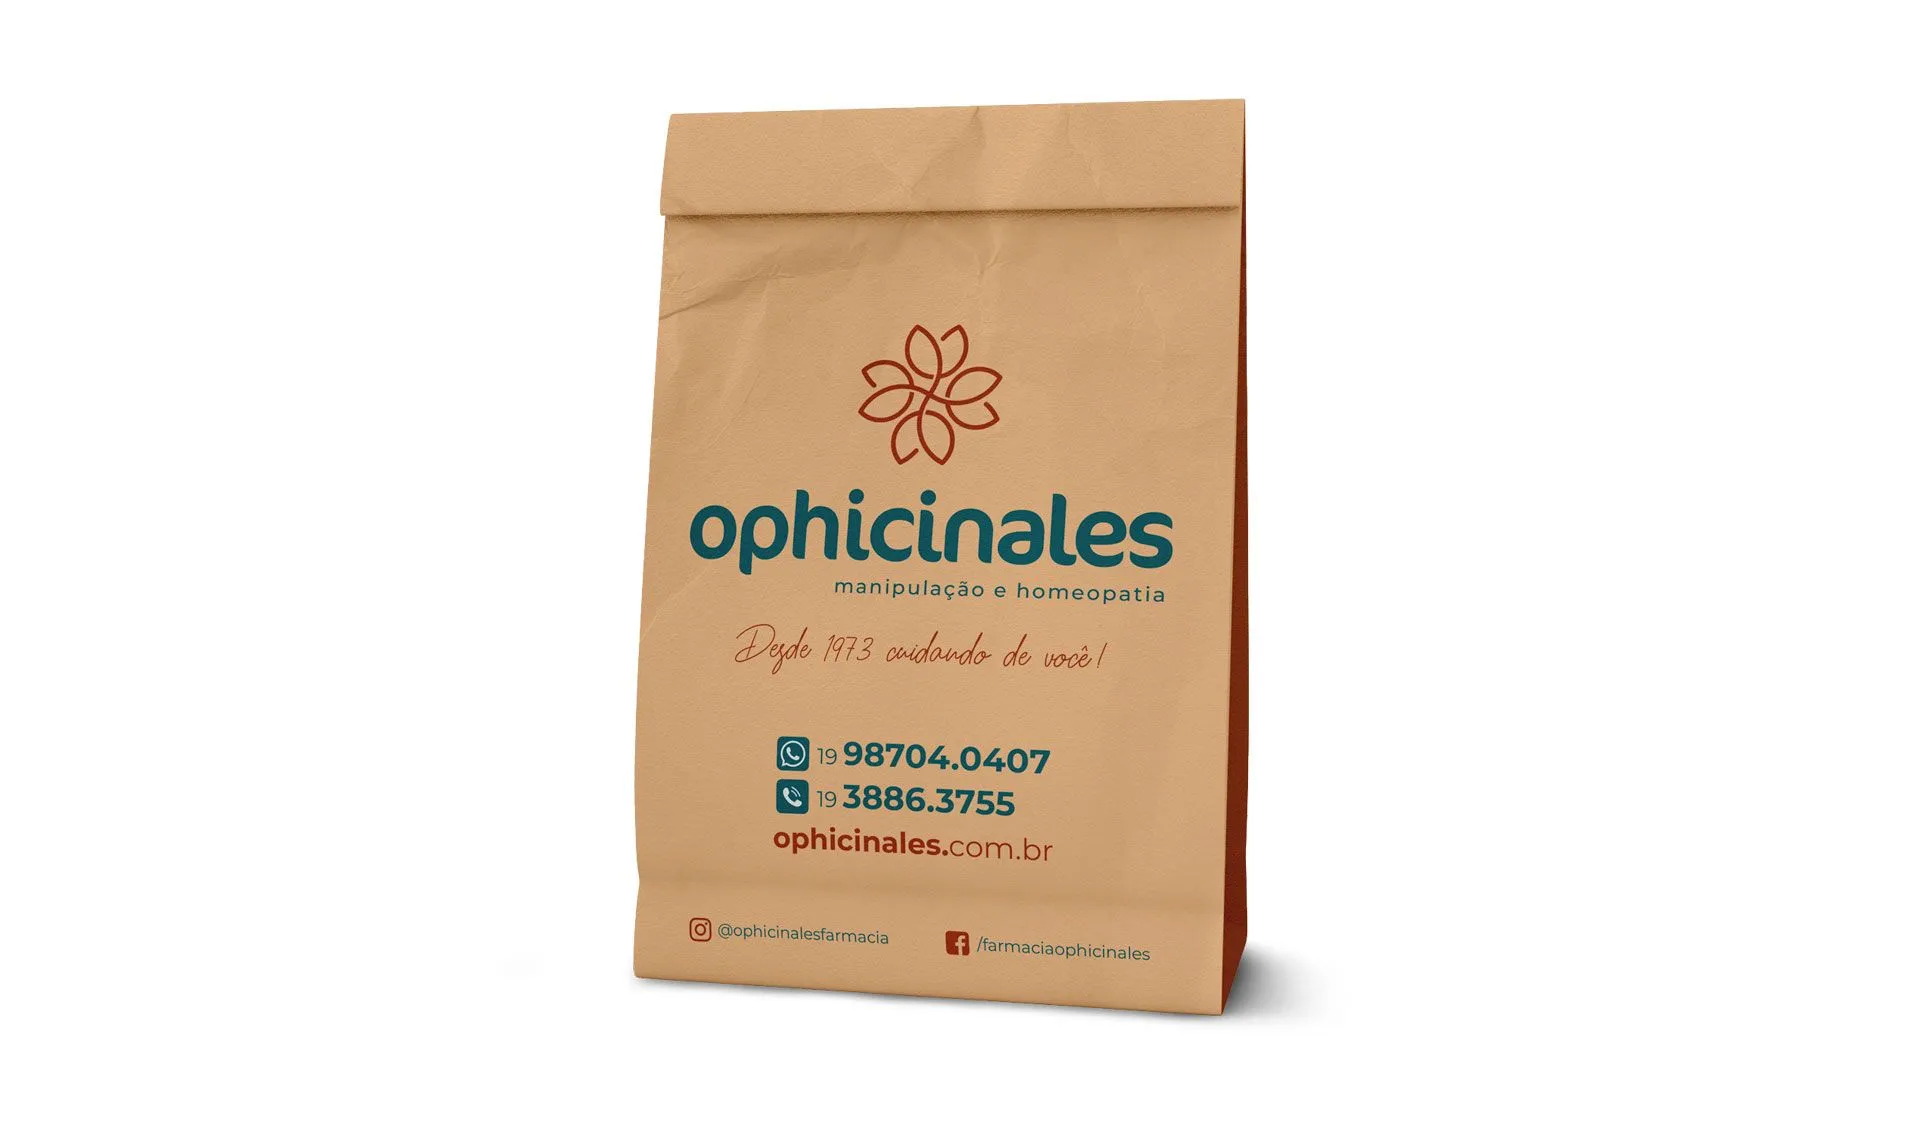 Ophicinales 9